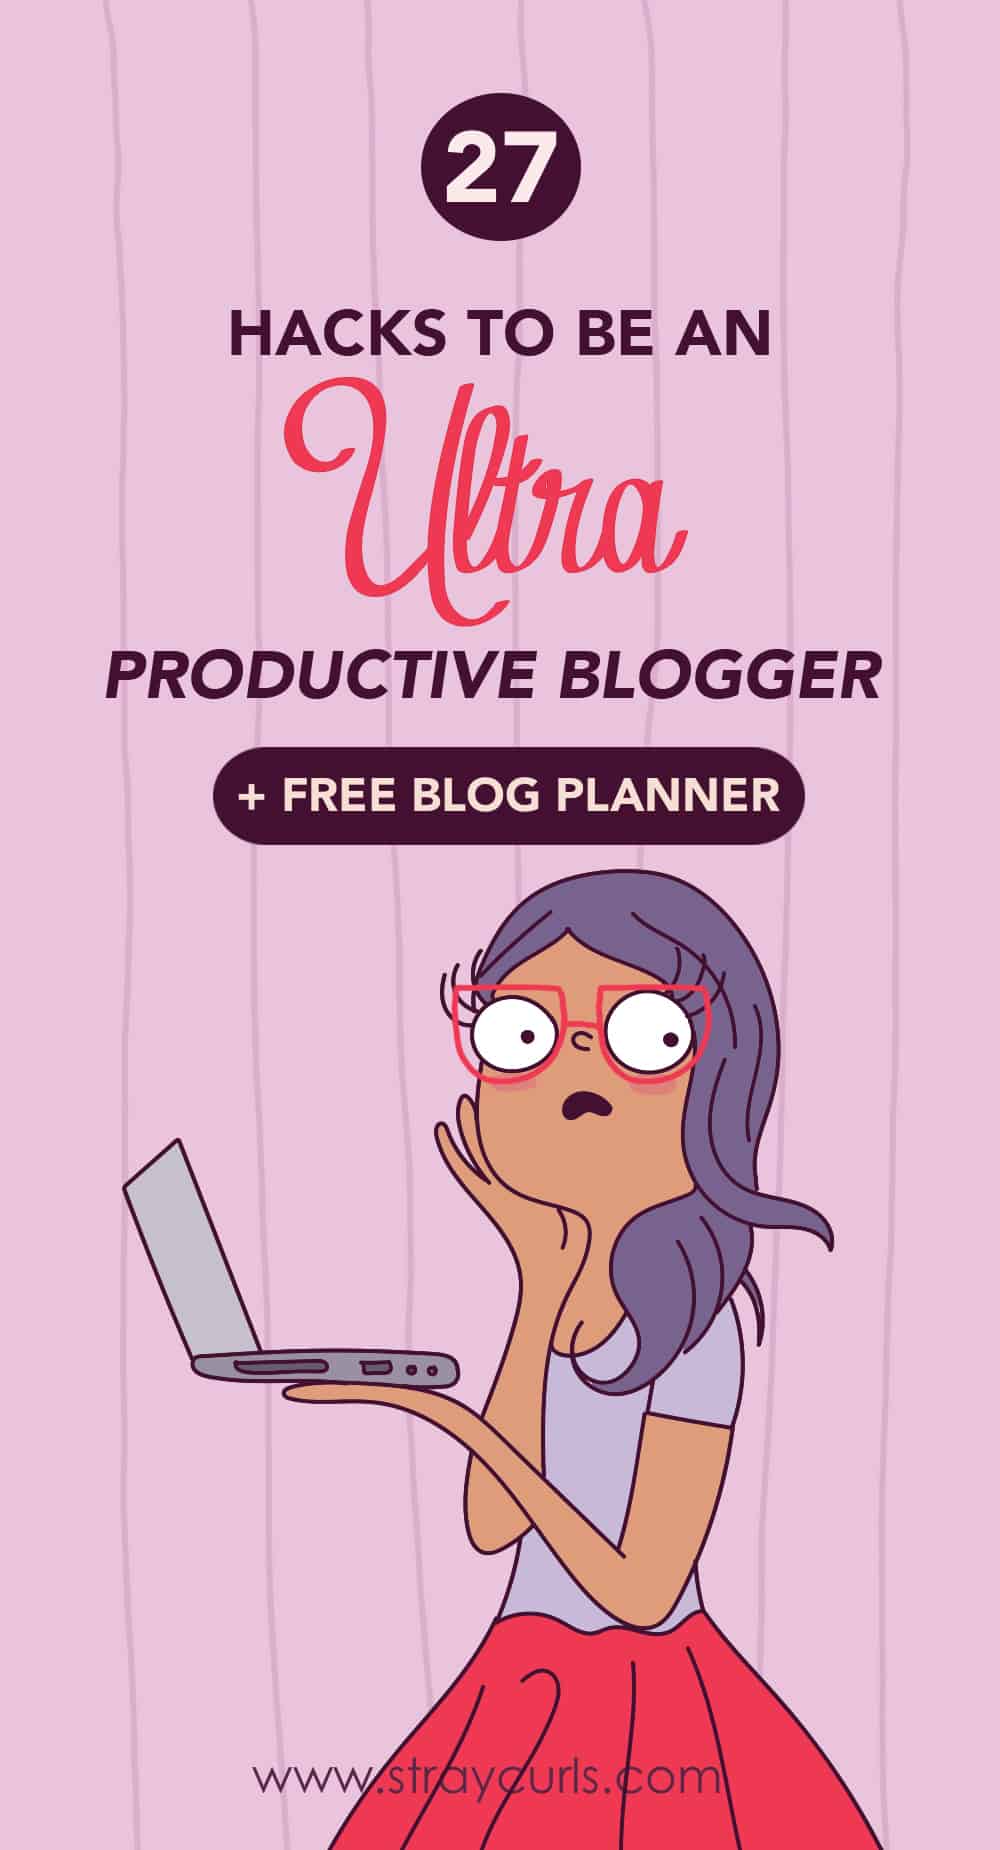 Time management hacks for Bloggers - Learn how to be more productive without getting overwhelmed. Learn to boost your traffic and write posts without going crazy! This post includes a free 12 page blog planner that you can download to grow your blog! #productivity #blogging #blogger #newblog #girlboss #time